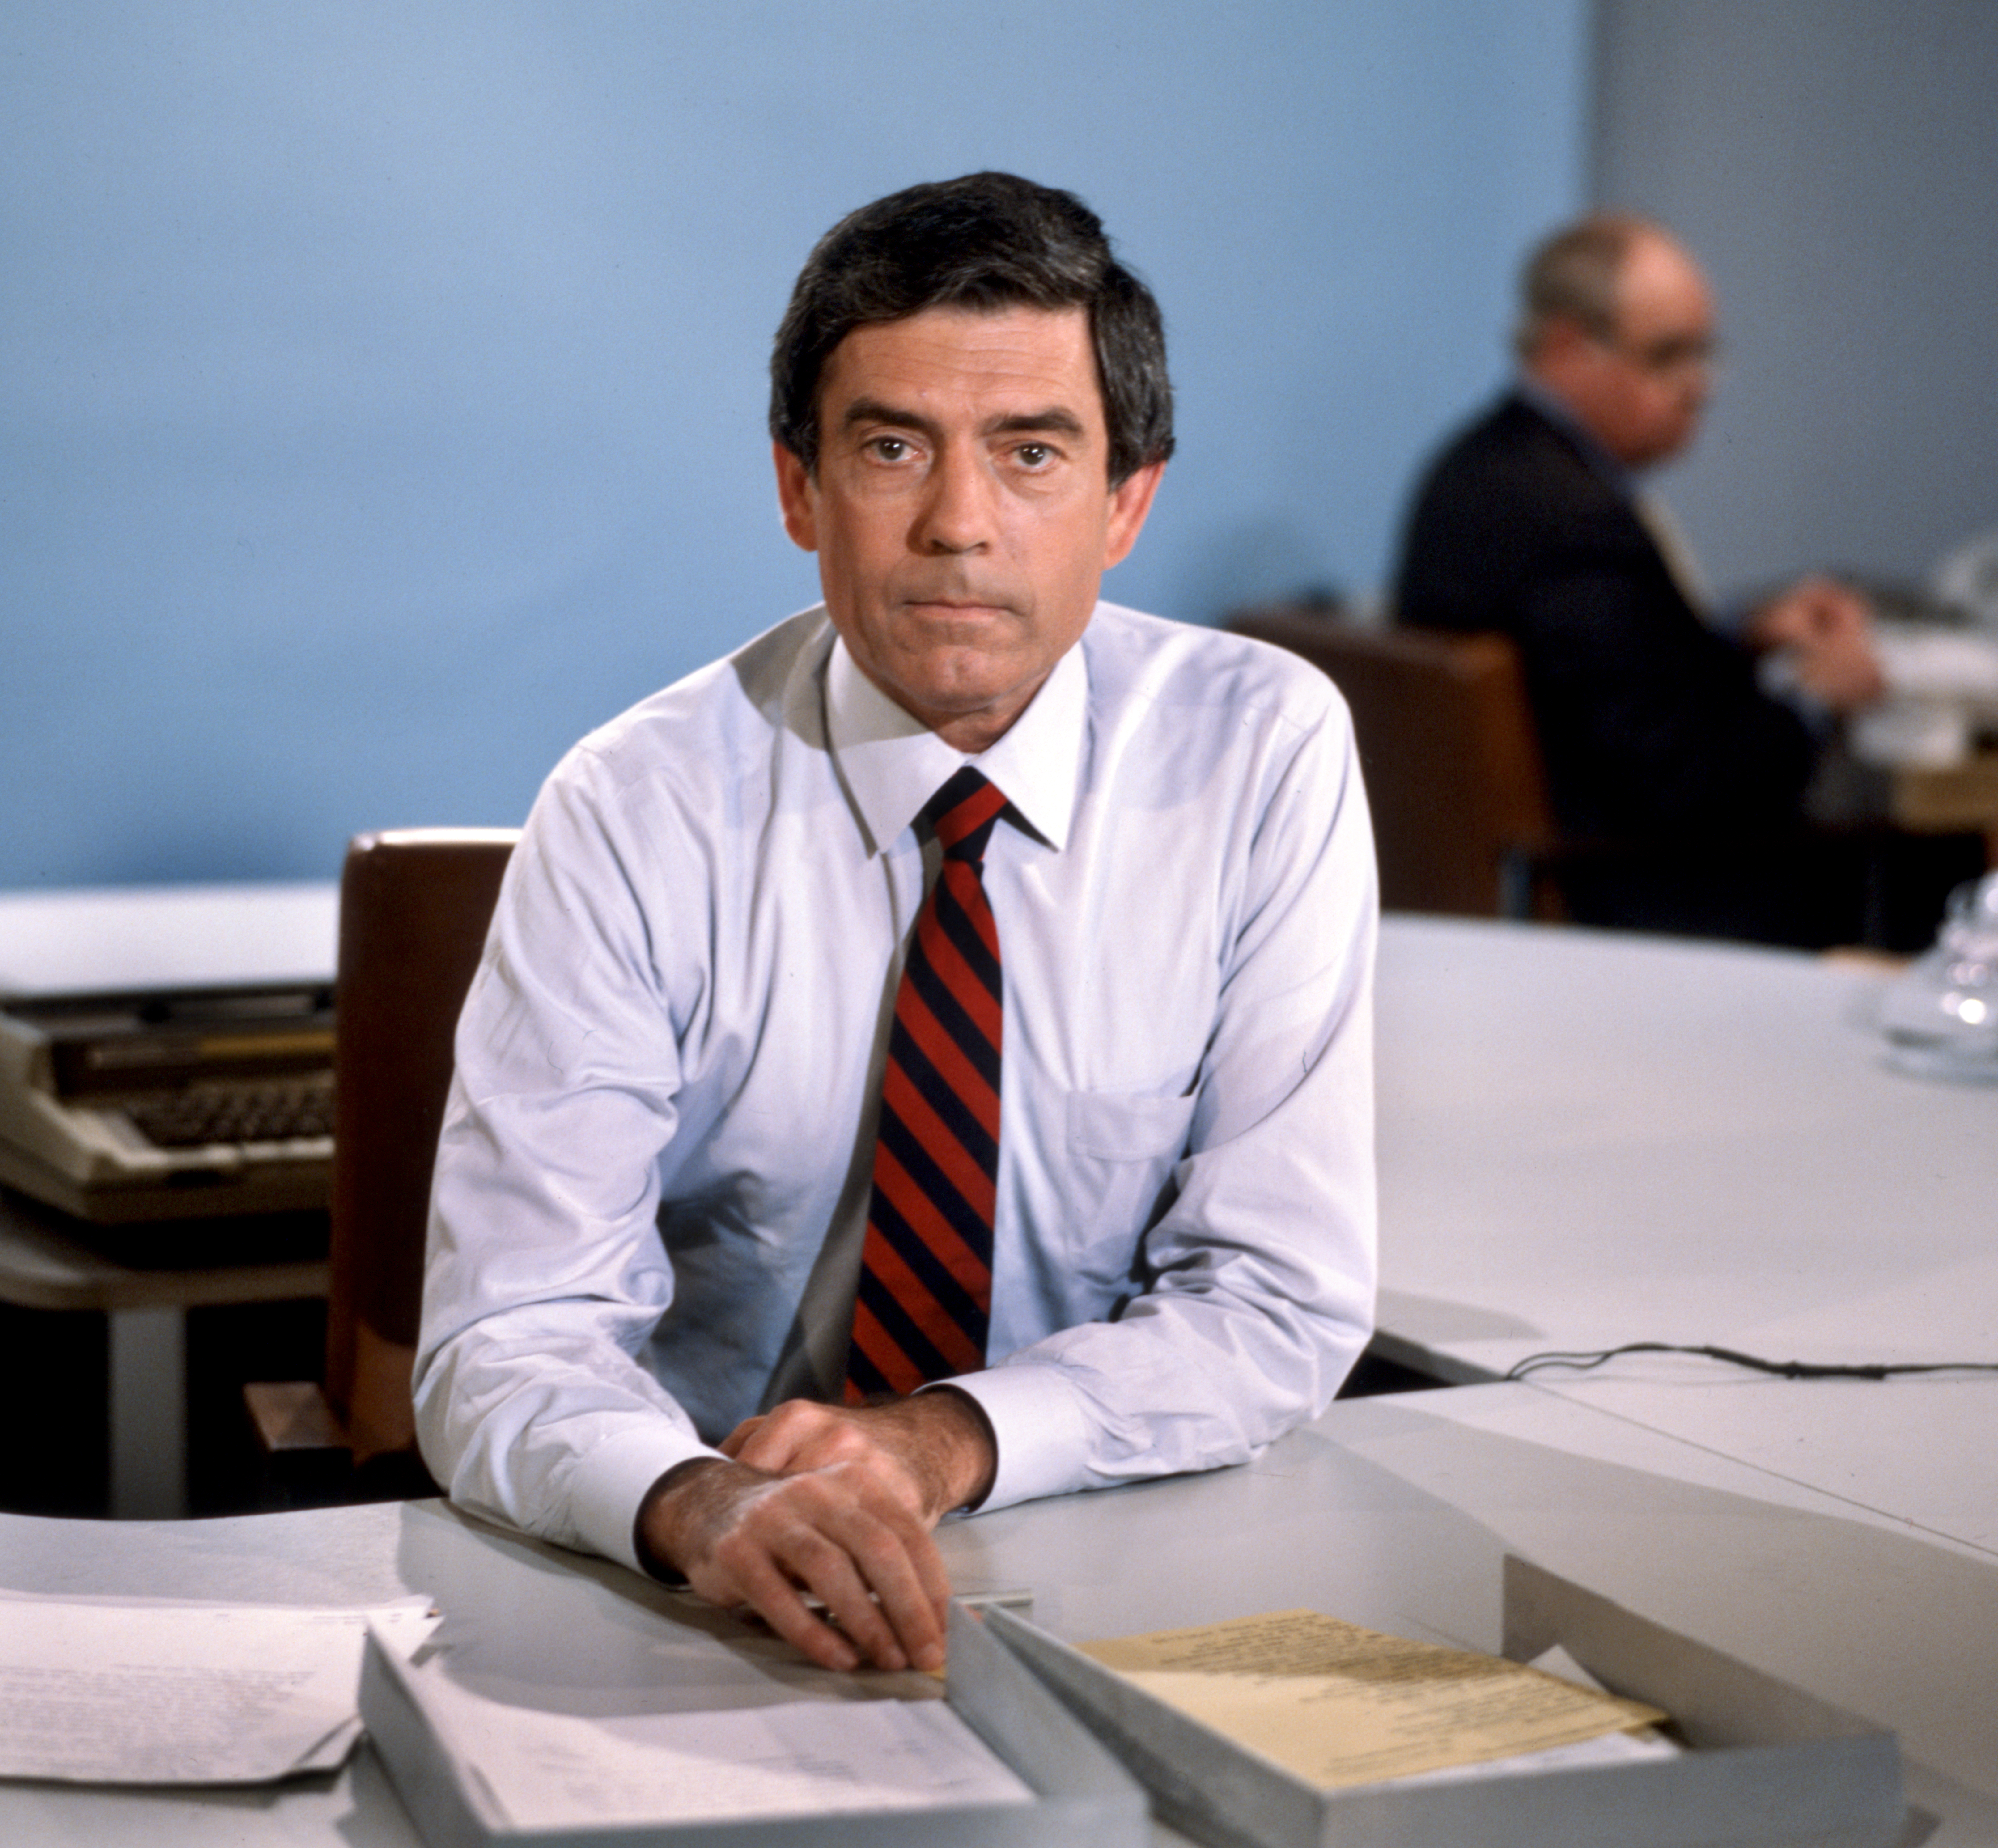 Dan Rather in New York in 1982 | Source: Getty Images